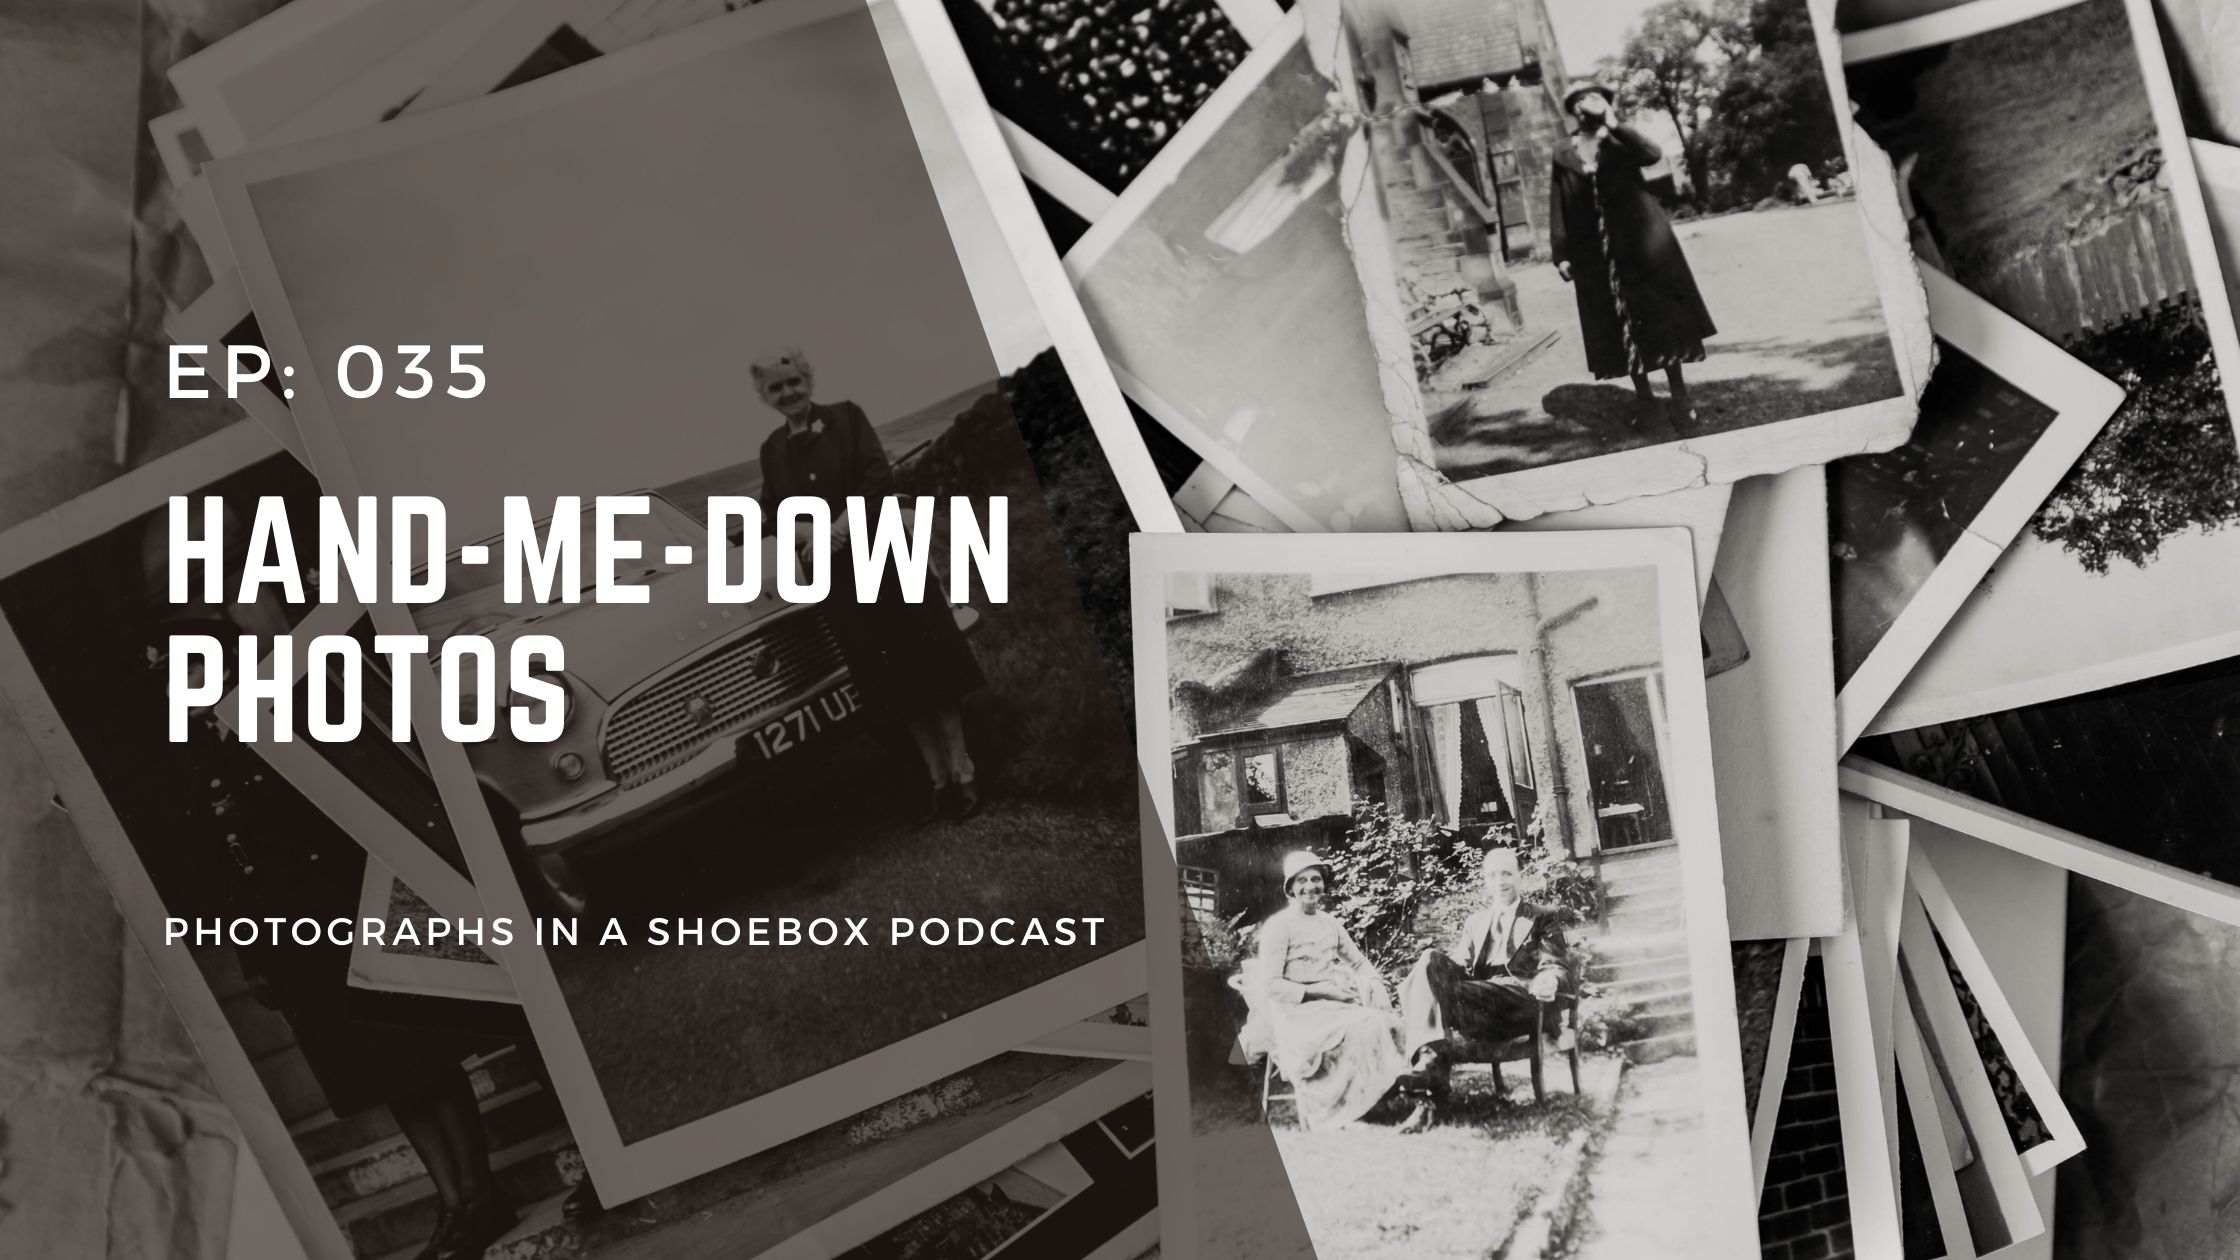 title graphic for podcast episode hand-me-down photos with old black and white photos as the backdrop